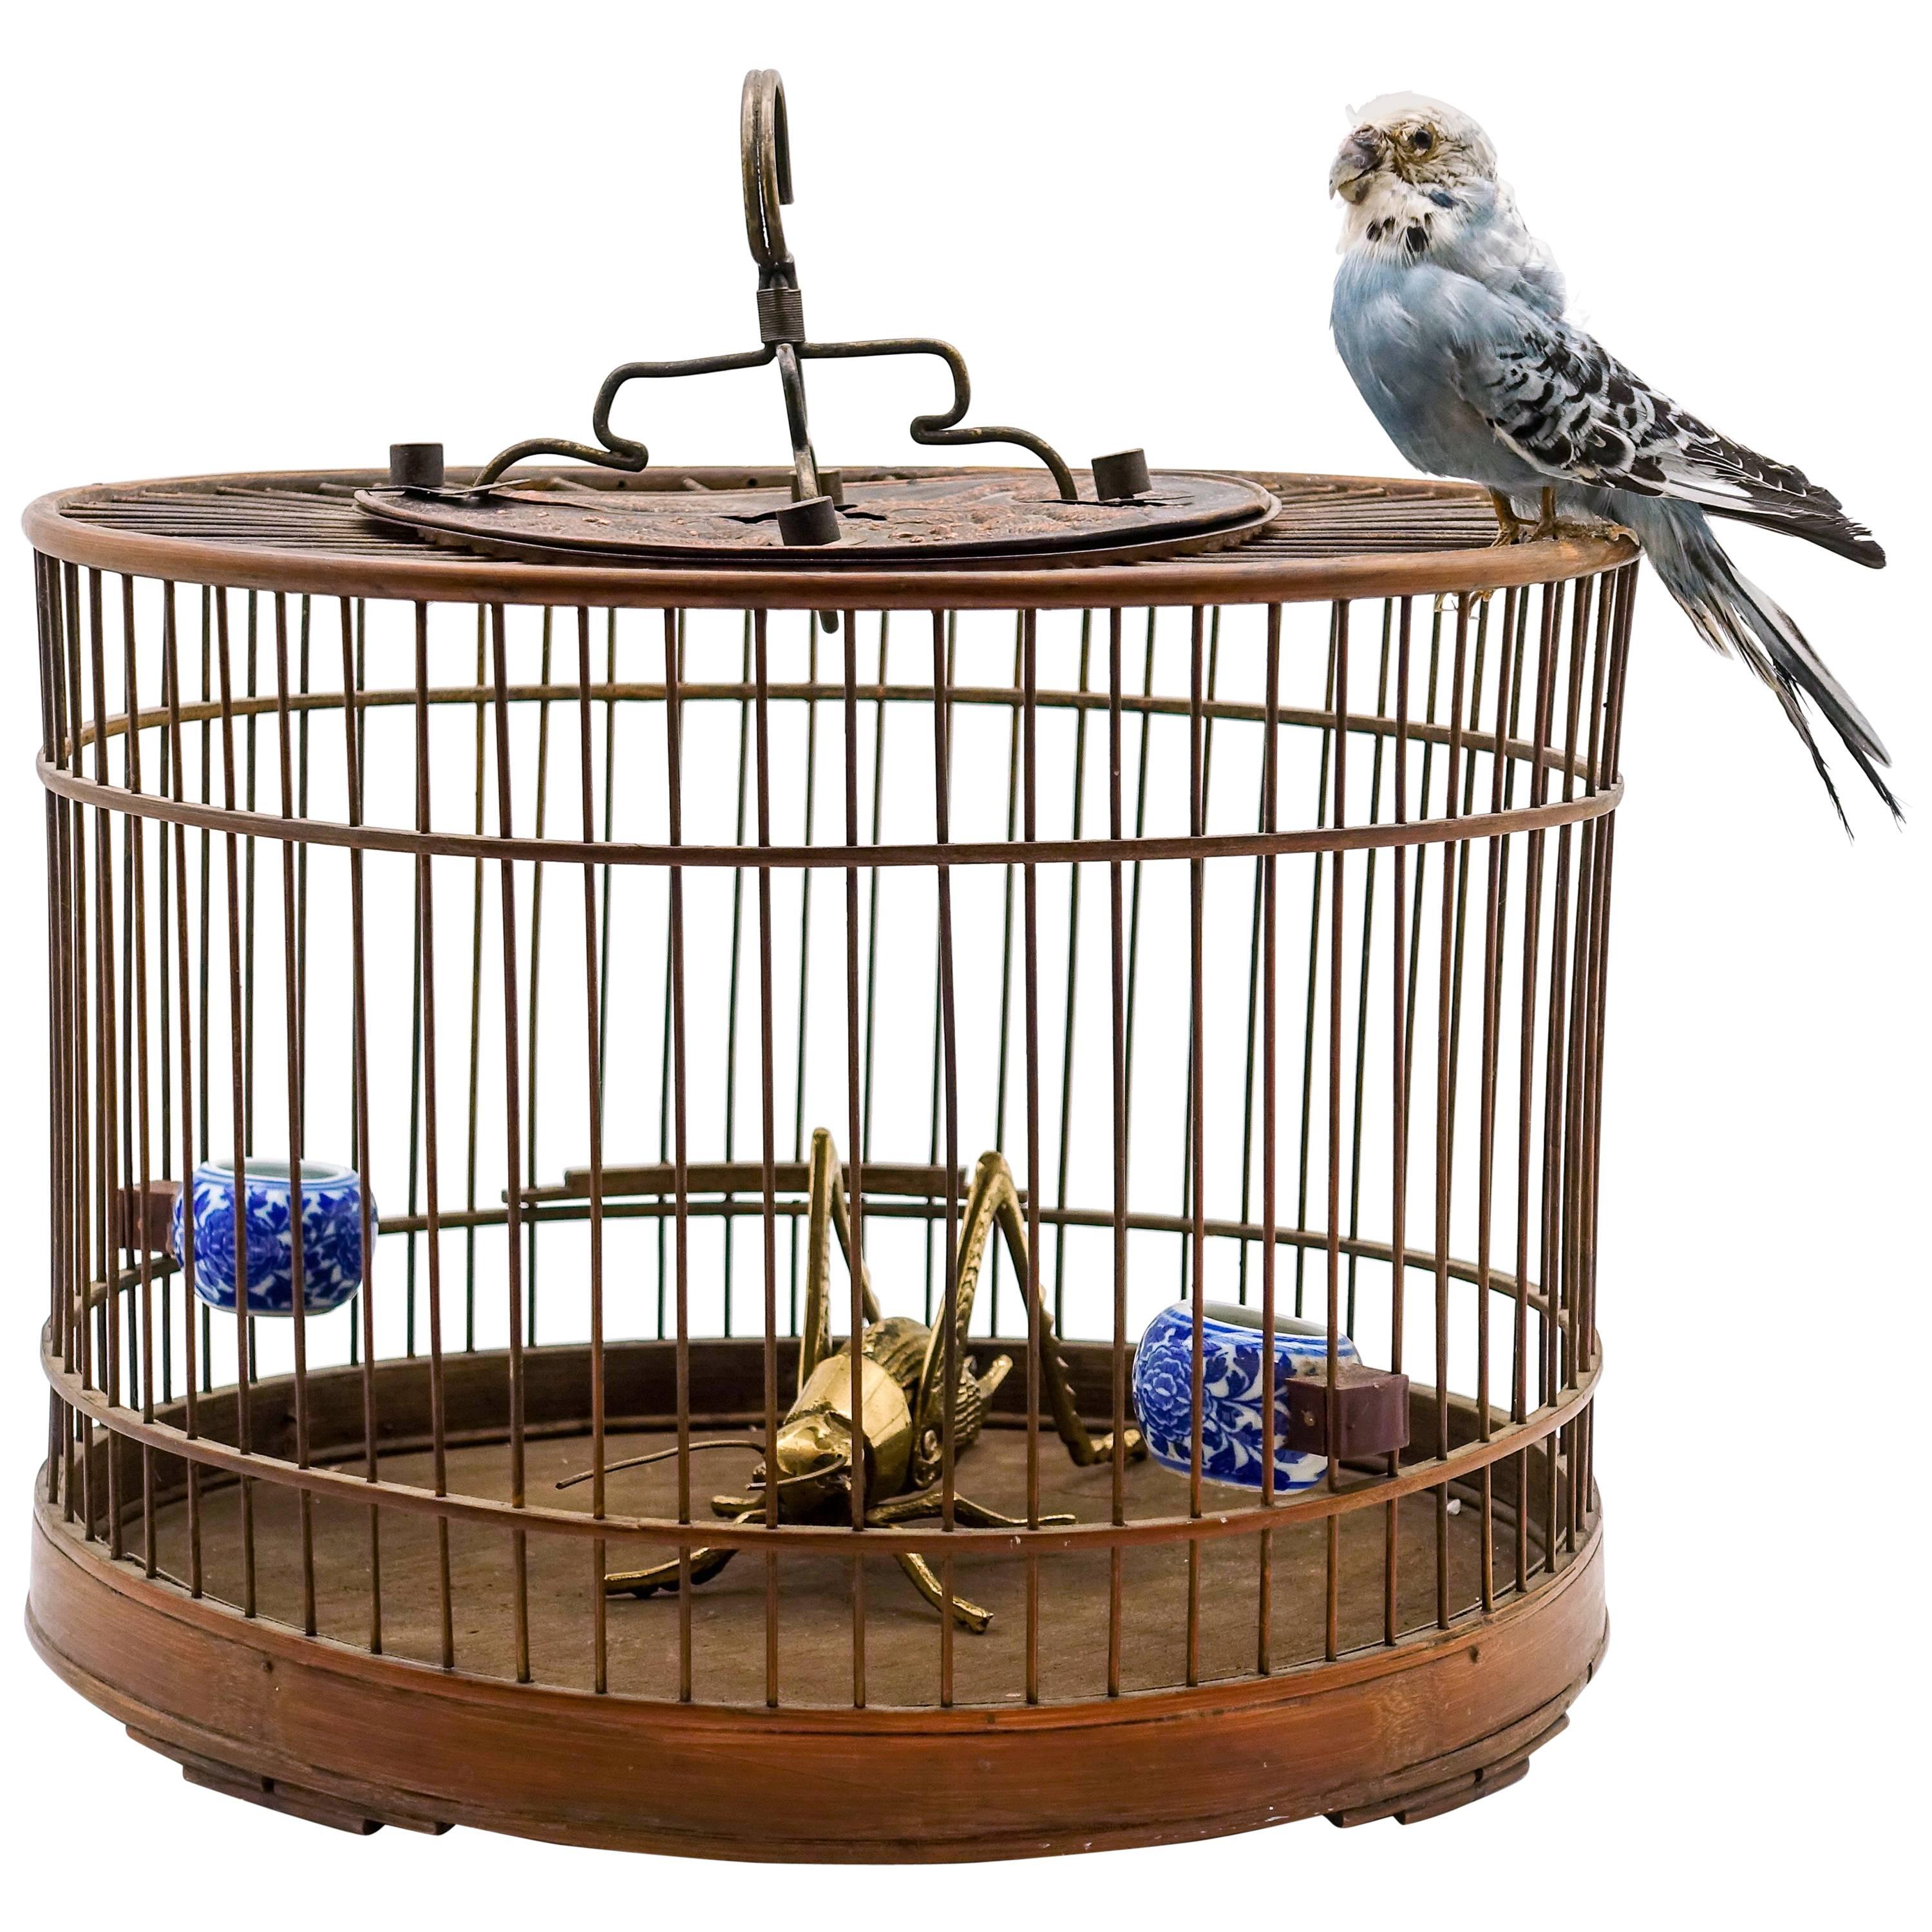 Cricket Cage with Brass Cricket and a Taxidermy Budgie